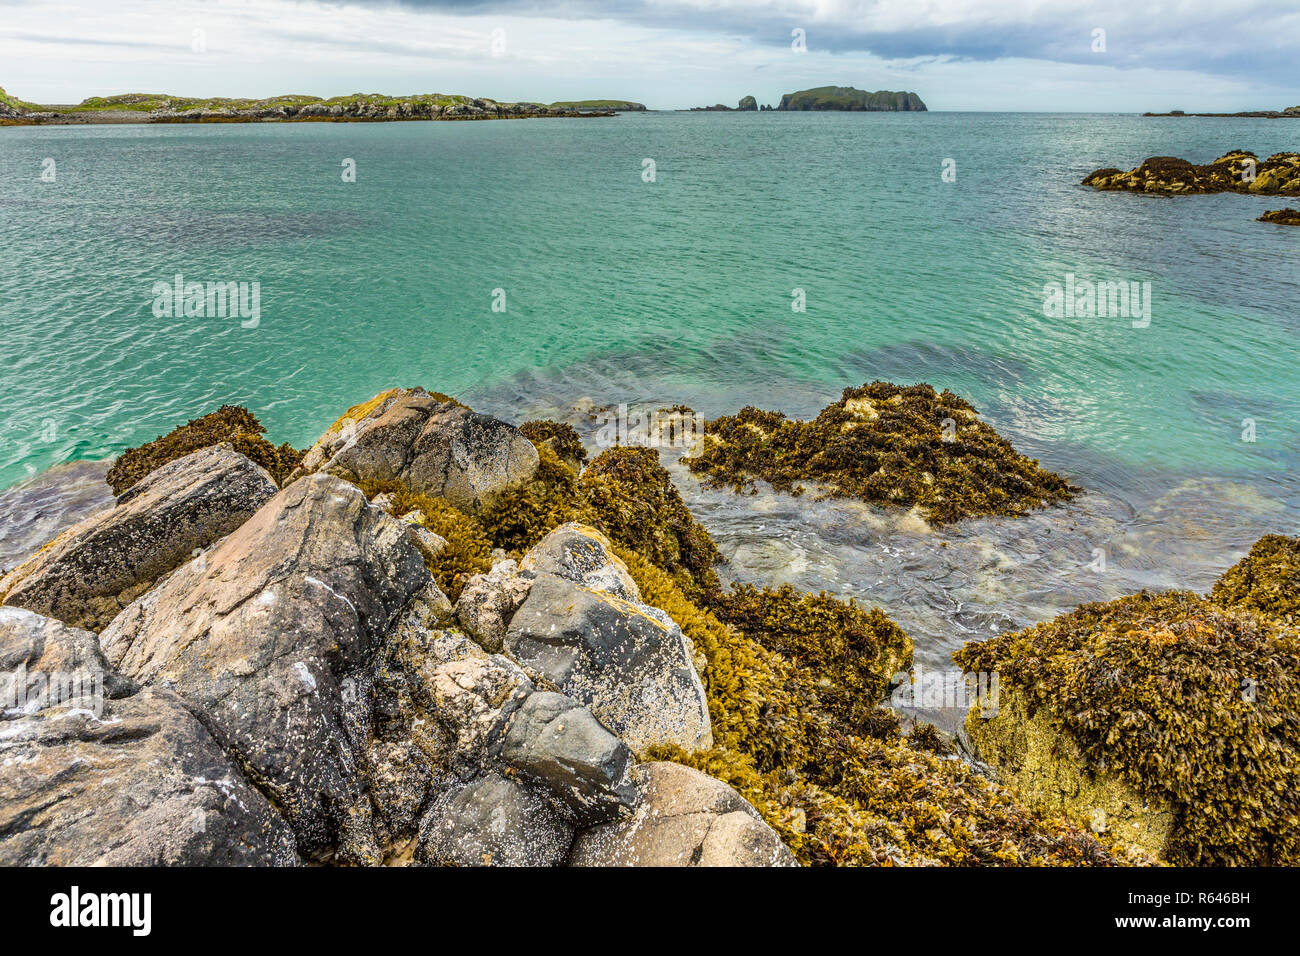 Seascape of rocks, seaweed and clear turquoise water at Bosta Beach, Great Bernera, Isle of Lewis, Outer Hebrides, Scotland, UK Stock Photo